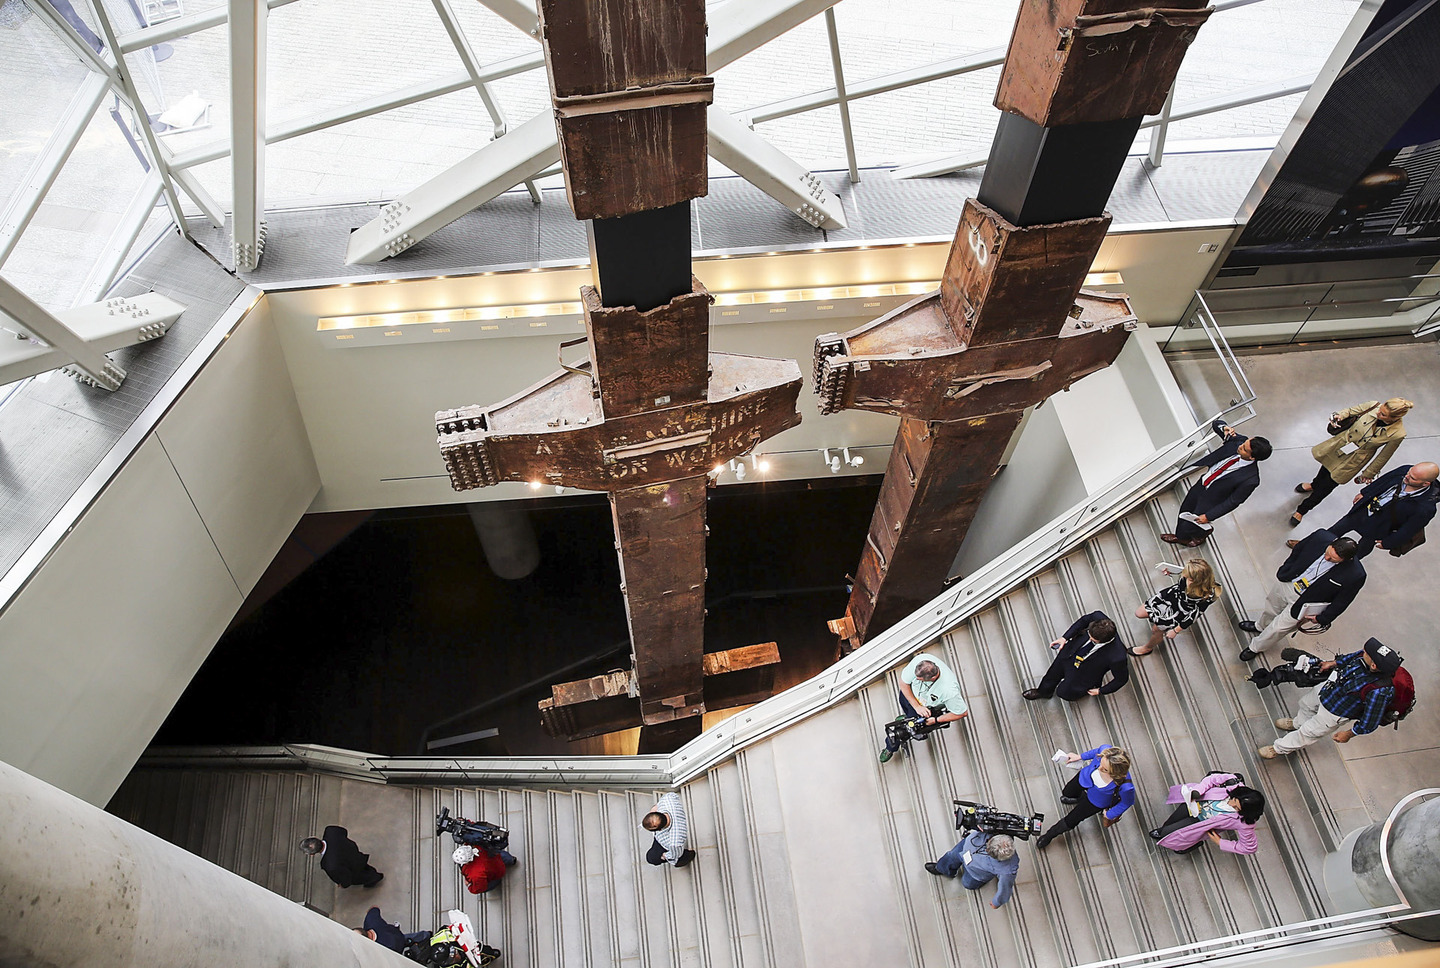 NEW YORK, NY - MAY 14:  The salvaged tridents from the World Trade Center are viewed during a preview of the National September 11 Memorial Museum on May 14, 2014 in New York City. The long awaited museum will open to the public on May 21 following a six-day dedication period for 9/11 families, survivors, first responders ,workers, and local city residents. For the dedication period the doors to the museum will be open for 24-hours a day from May 15 through May 20. On Thursday President Barack Obama and the first lady will attend the dedication ceremony for the opening of the museum. While the construction of the museum has often been fraught with politics and controversy, the exhibitions and displays seek to pay tribute to the 2,983 victims of the 9/11 attacks and the 1993 bombing while also educating the public on the September 11 attacks on the World Trade Center, the Pentagon and in Pennsylvania.  (Photo by Spencer Platt/Getty Images)